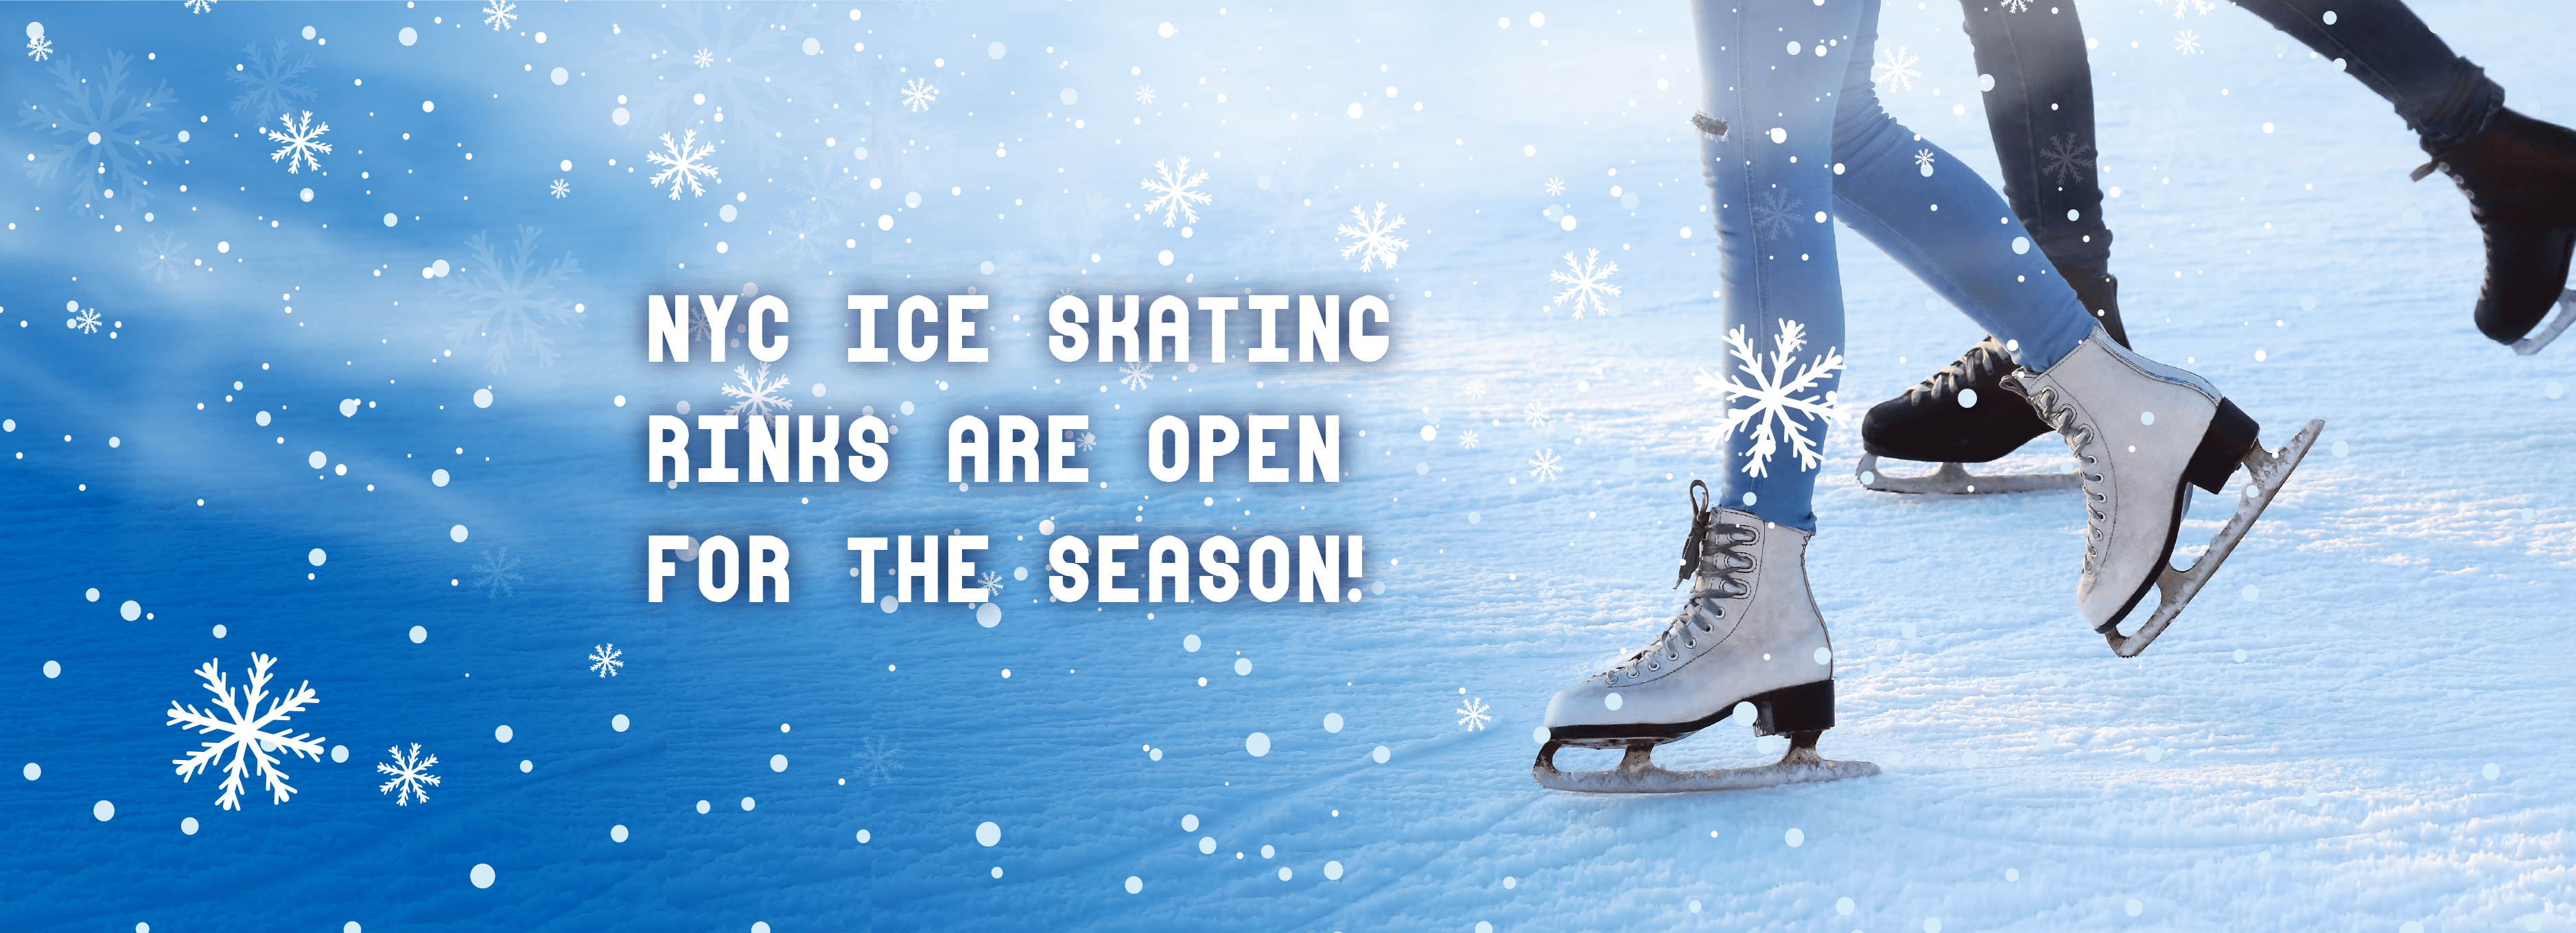 NYC ice rinks are officially open for the season! - New York City Ferry ...